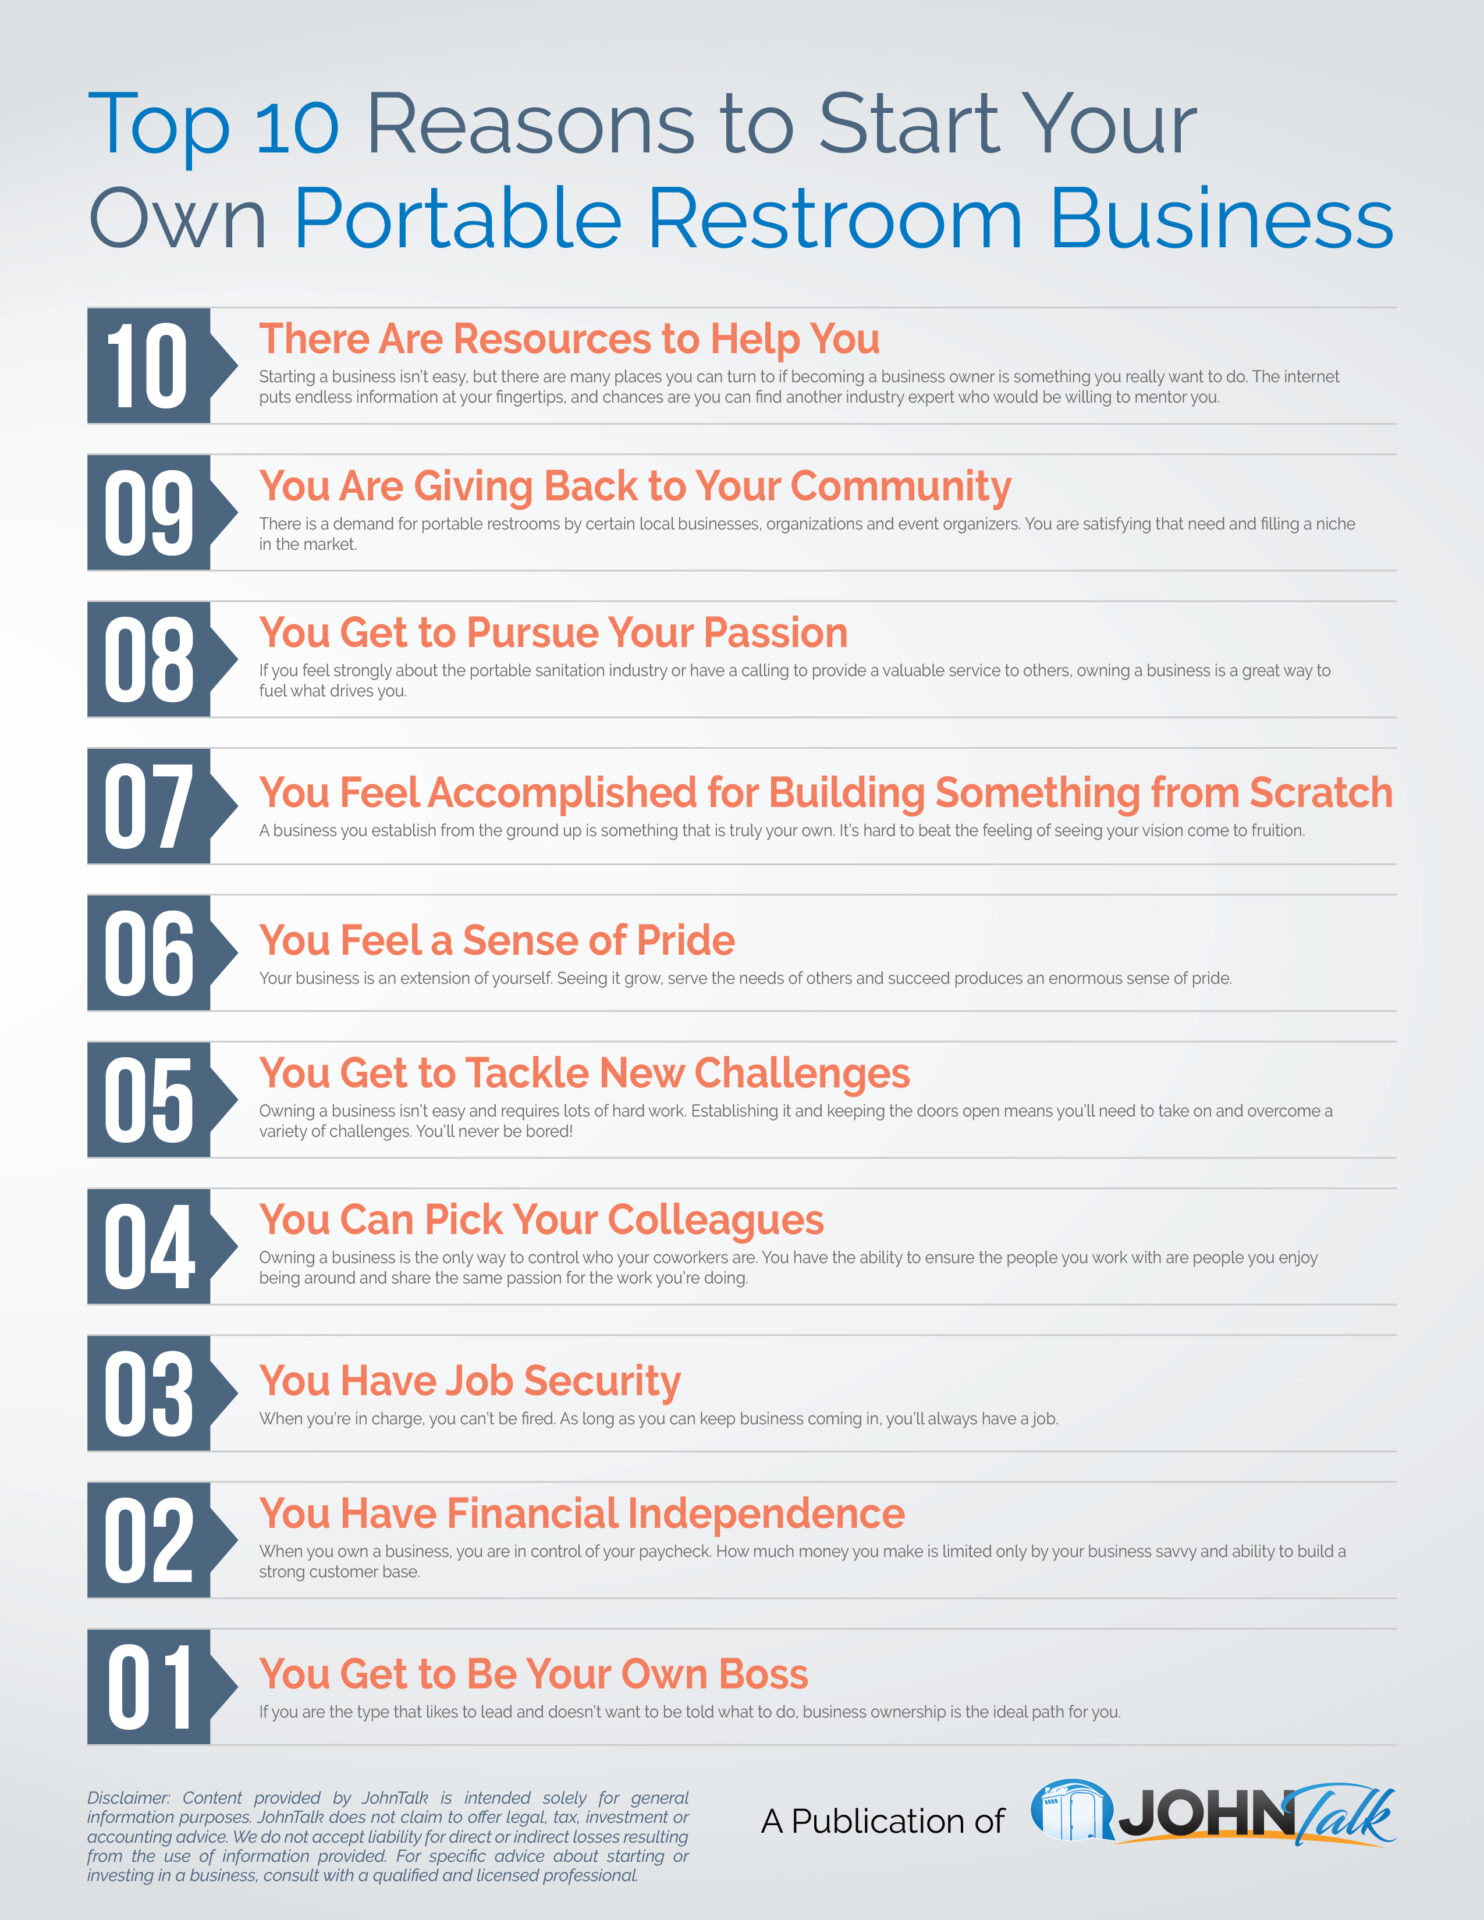 Top 10 Reasons to Start Your Own Portable Restroom Business